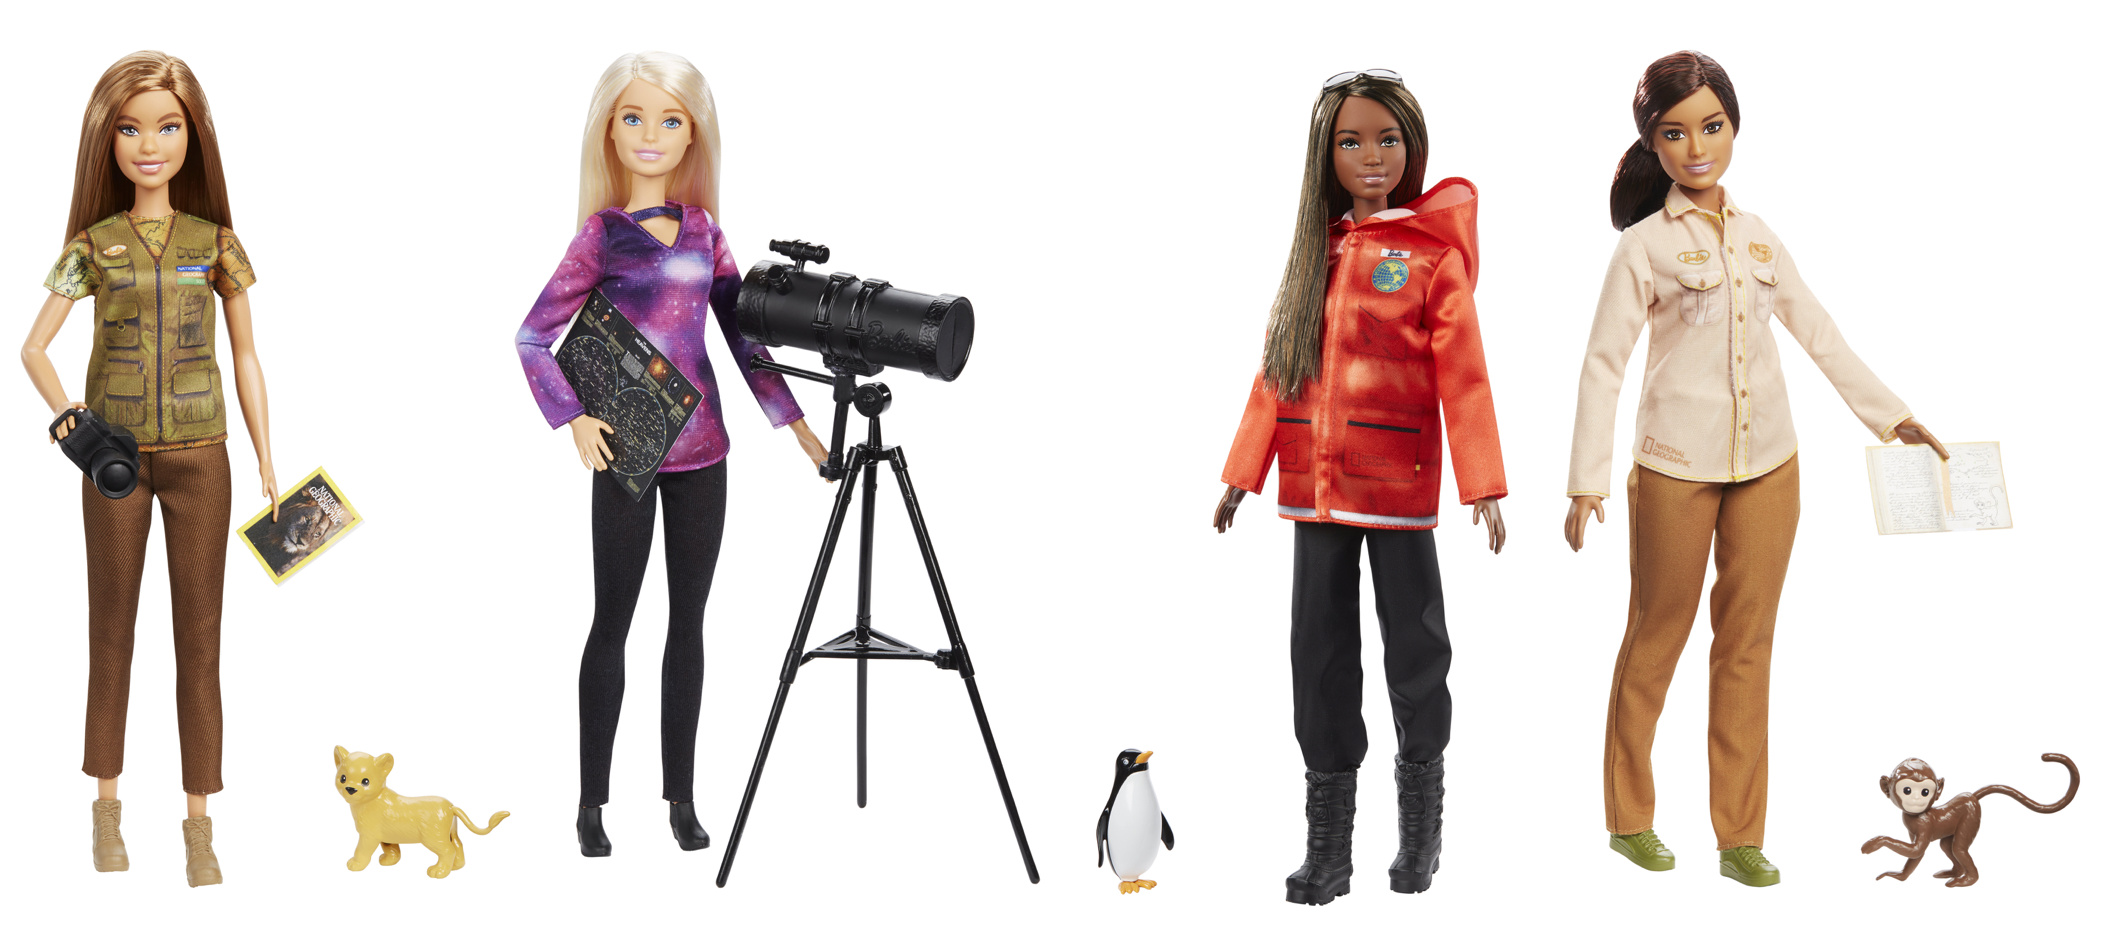 2019 Barbie National Geographic Career Doll